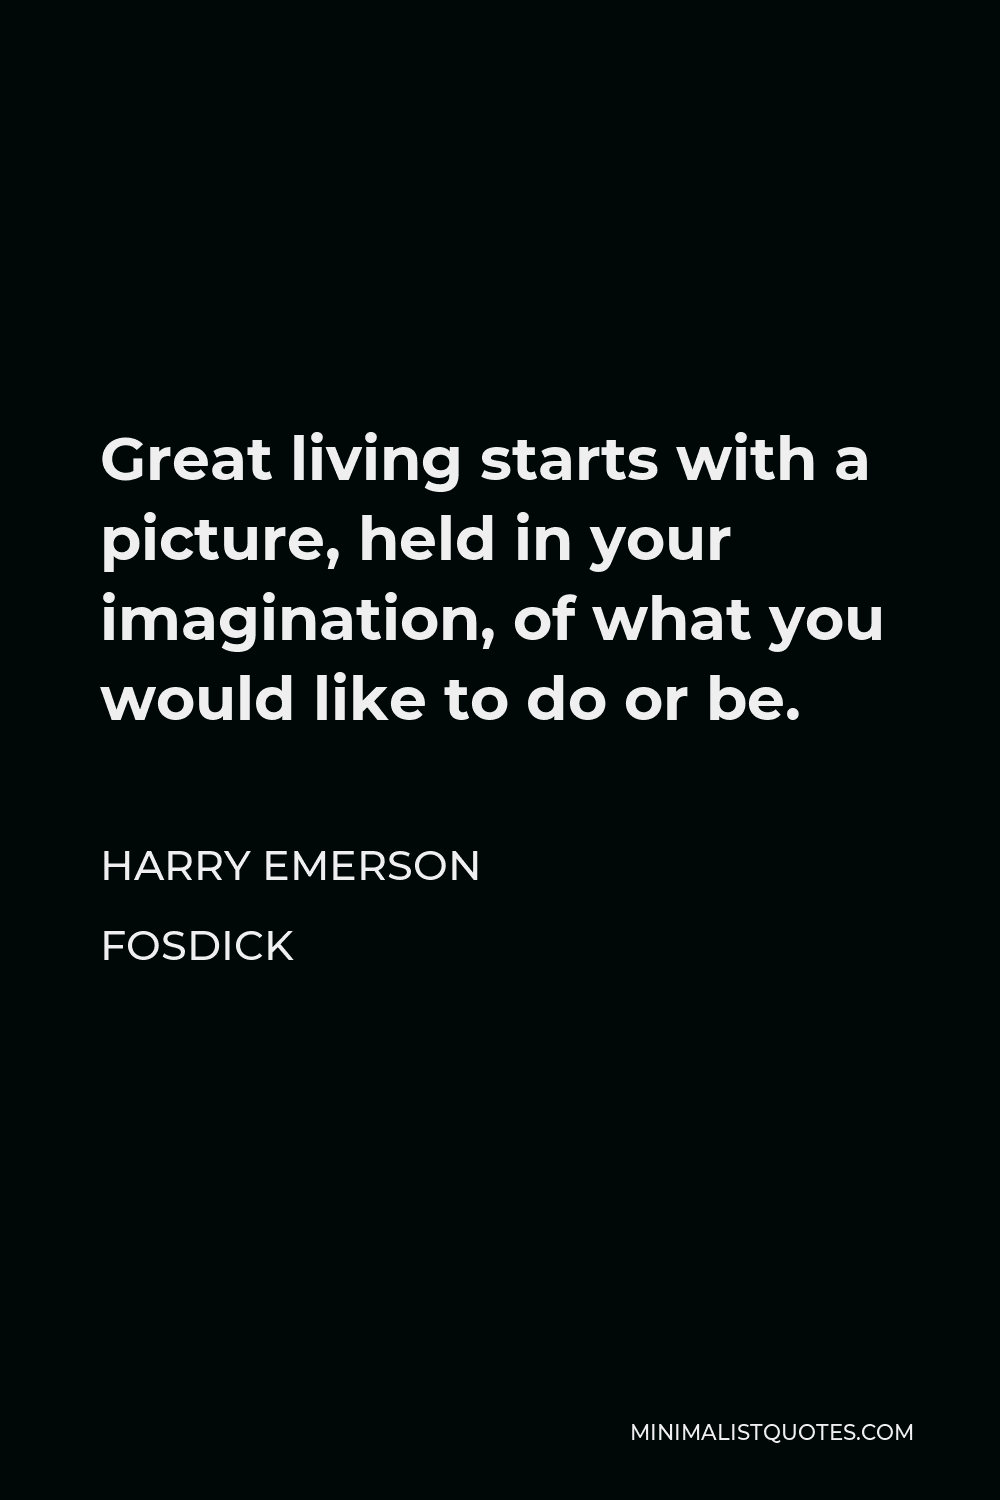 Harry Emerson Fosdick Quote - Great living starts with a picture, held in your imagination, of what you would like to do or be.